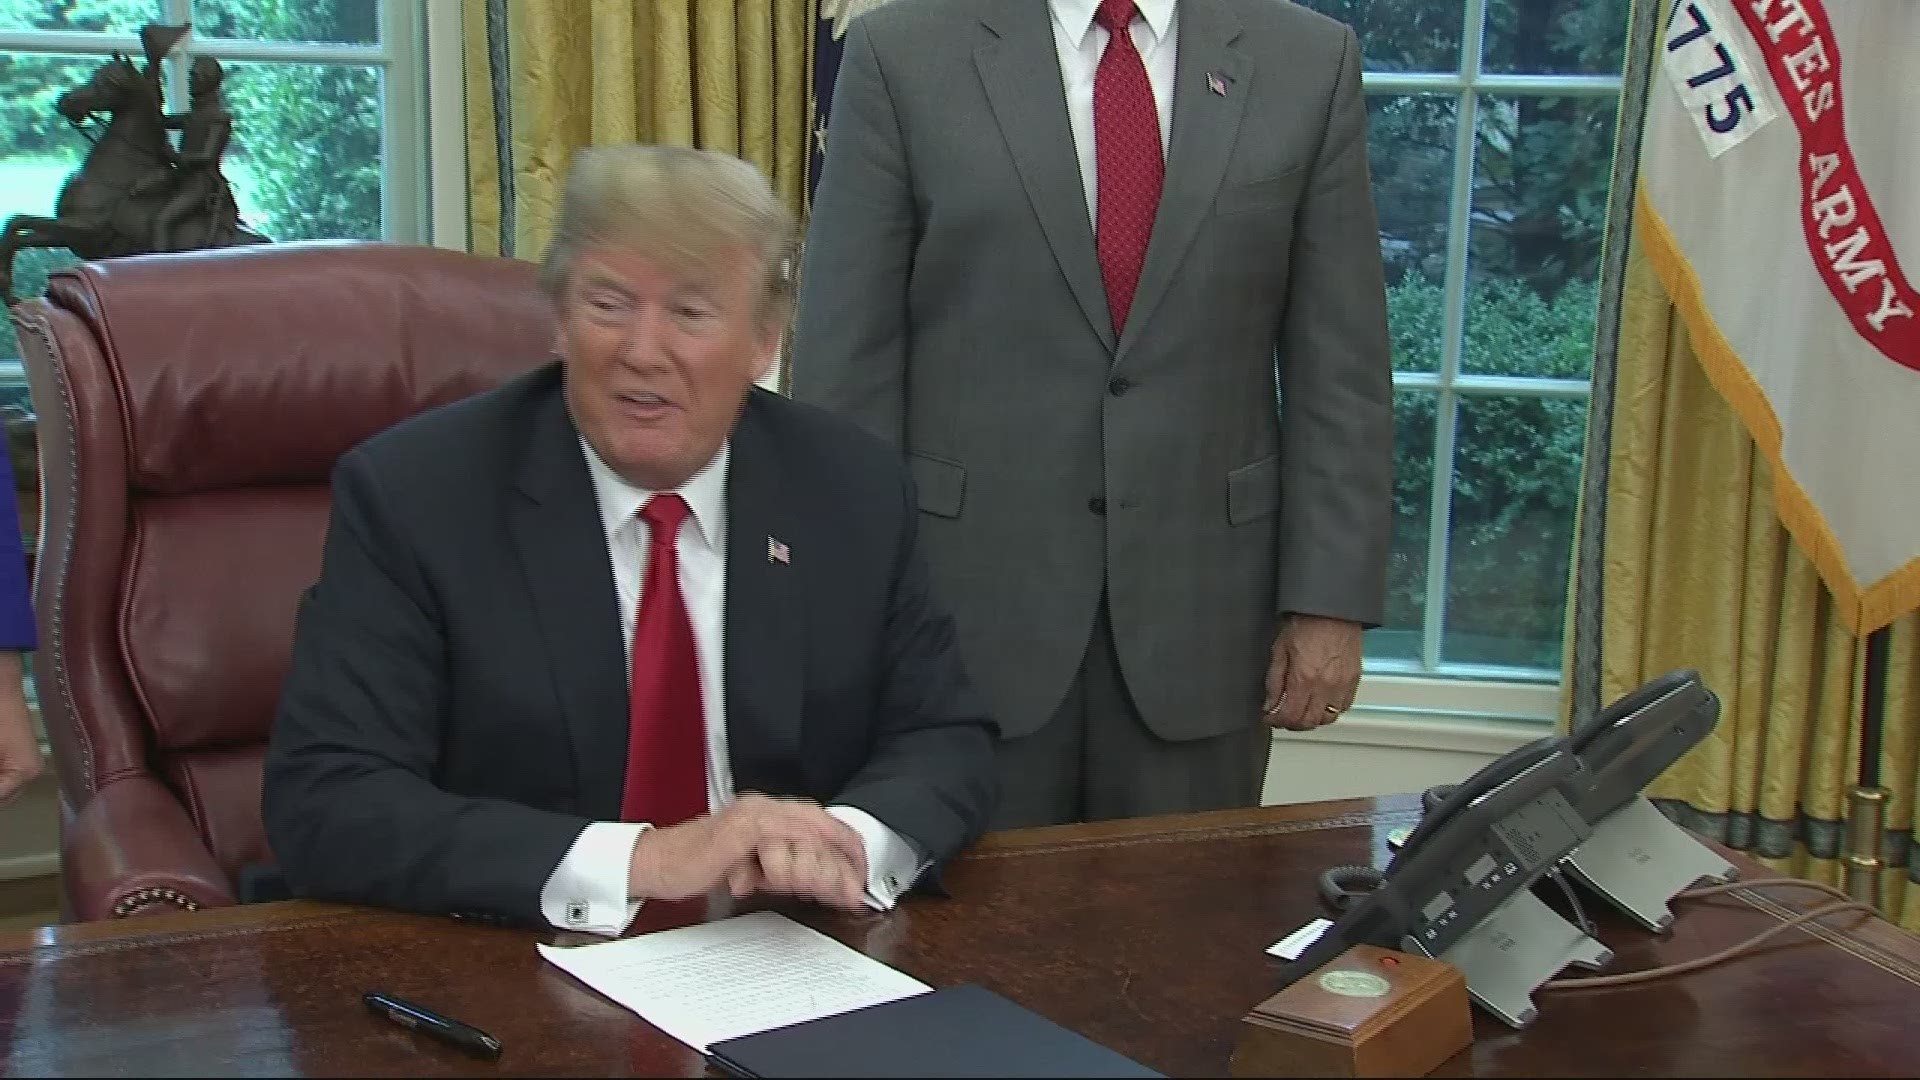 President Donald Trump signed an executive order Wednesday ending the process of separating children from families after they are detained crossing the border illegally. (June 20 - AP)